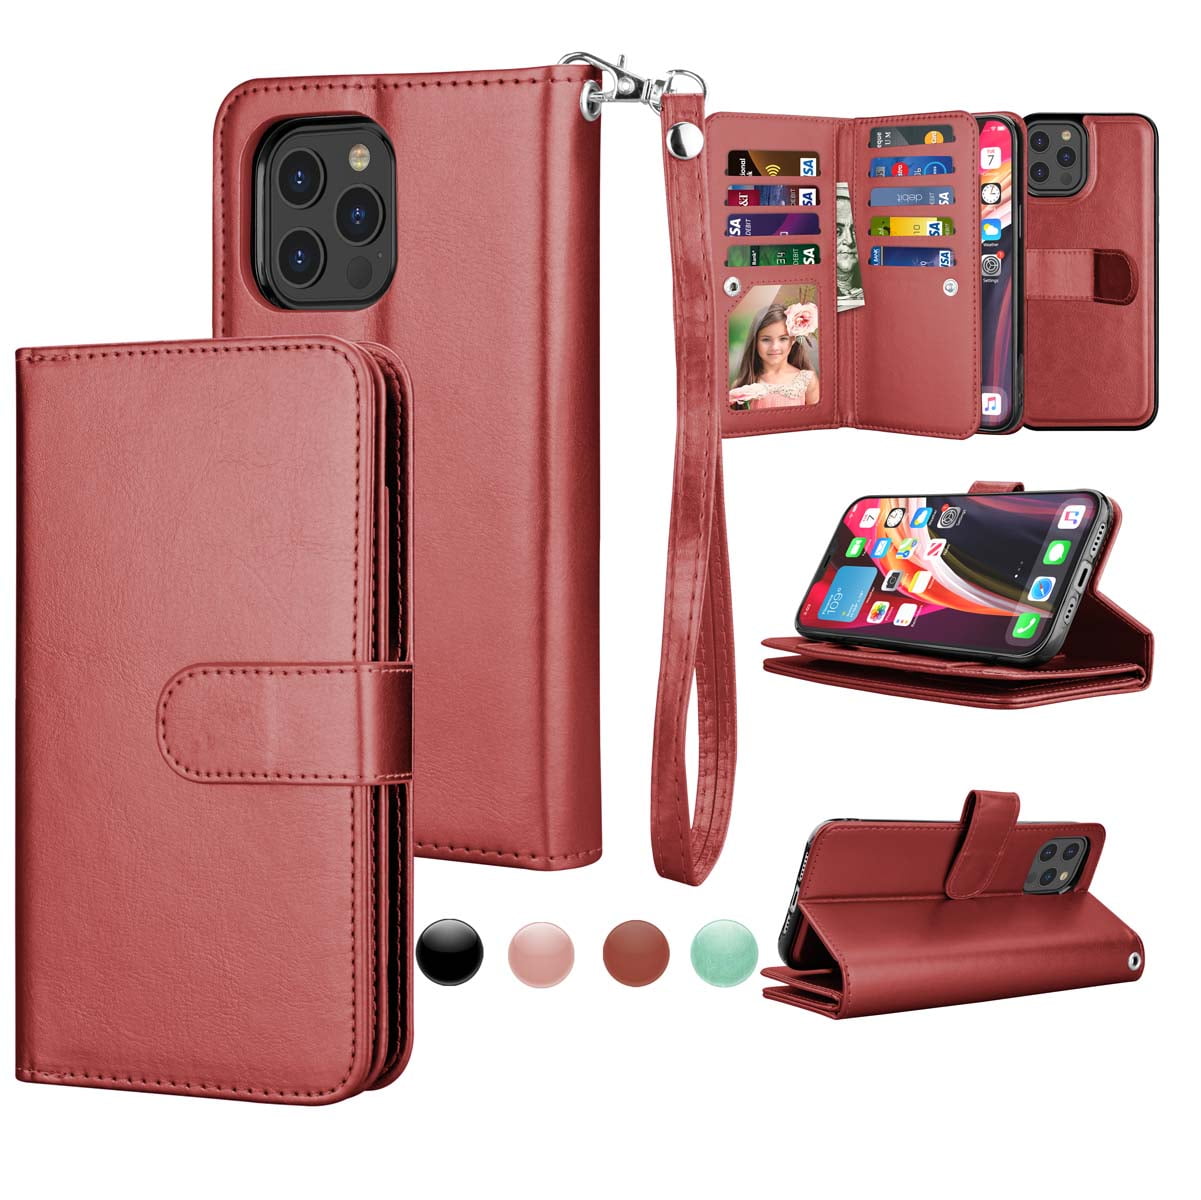 Iphone 12 Mini Case Wallet Case Iphone 12 Iphone 12 Mini Pu Leather Case Njjex Pu Leather Magnet Stand Wallet Credit Card Holder Flip Case 9 Card Slots Case For Apple Iphone